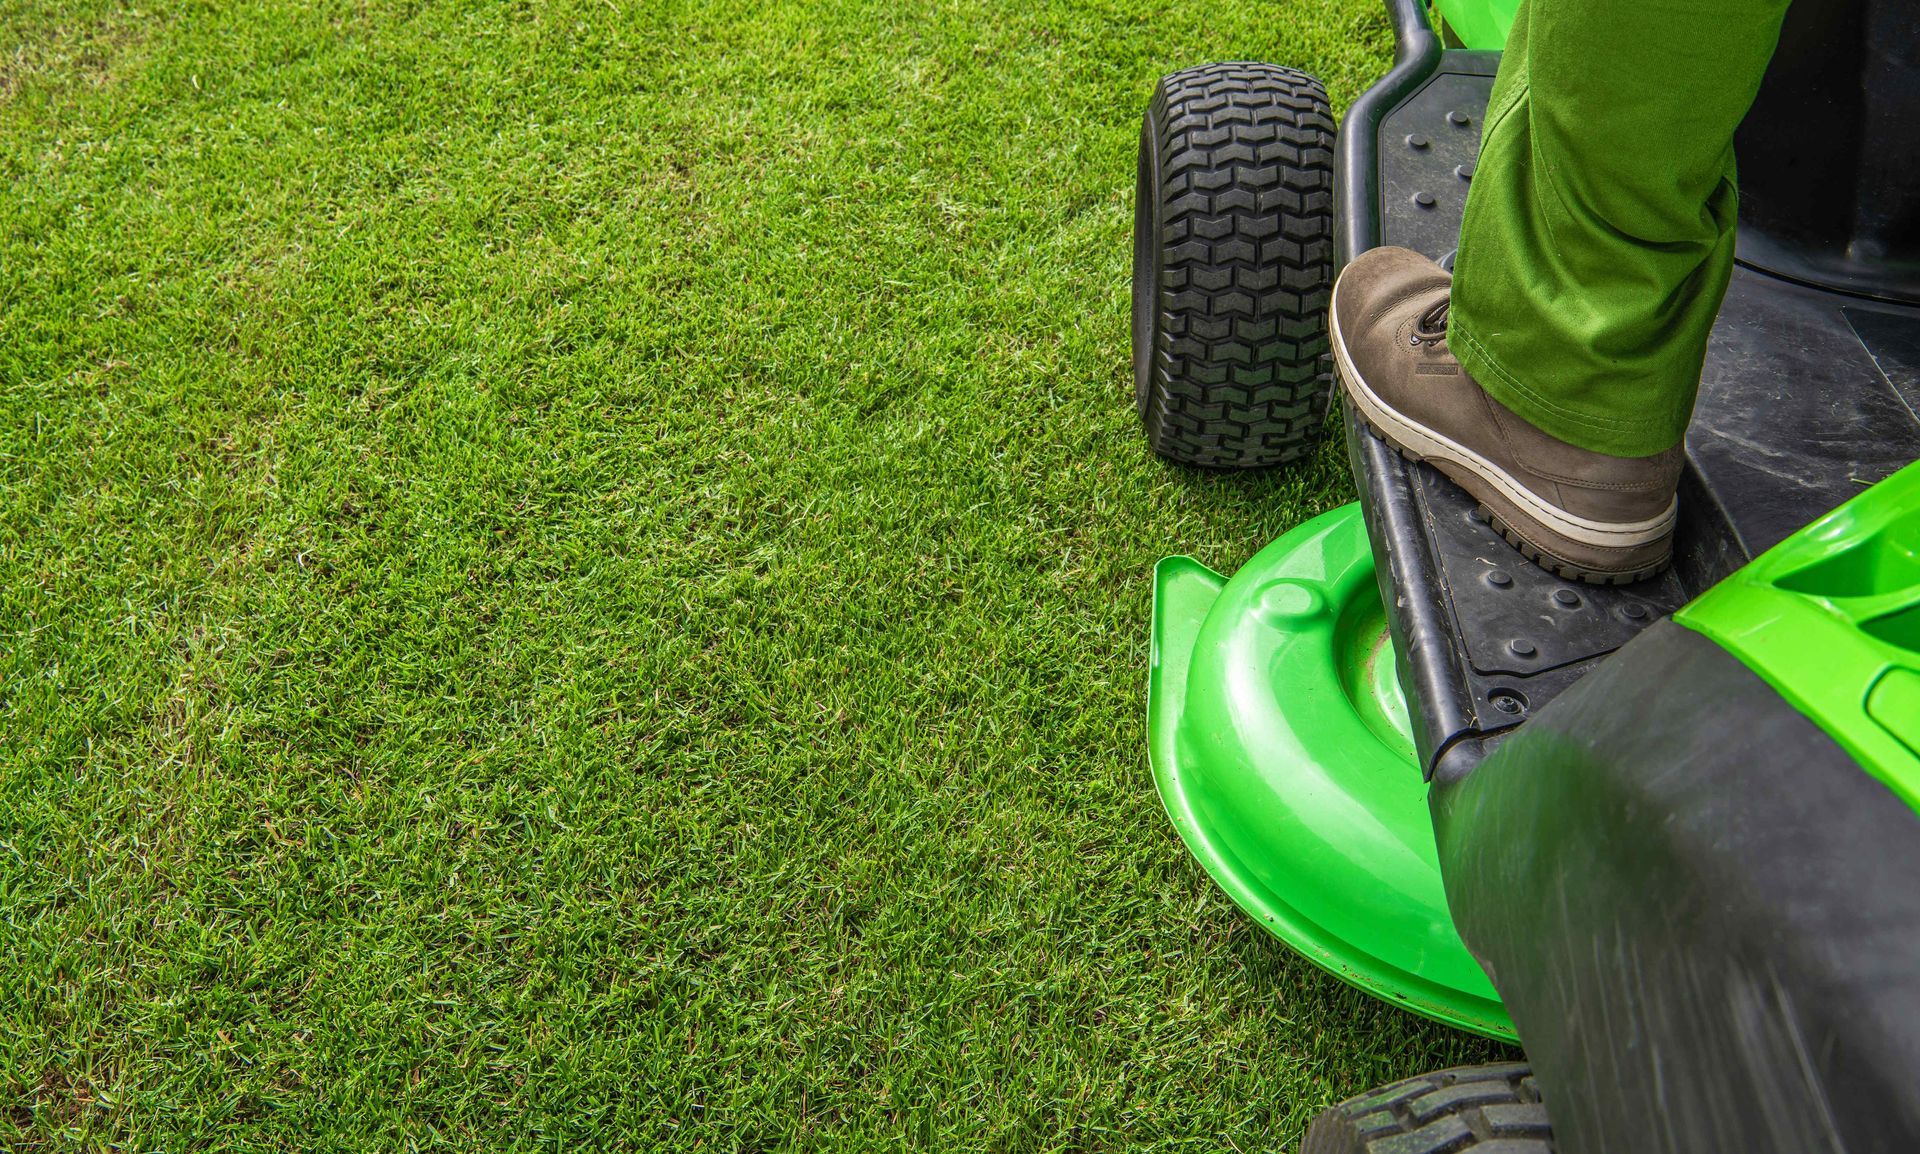 Mowing grass on ride on lawn mower